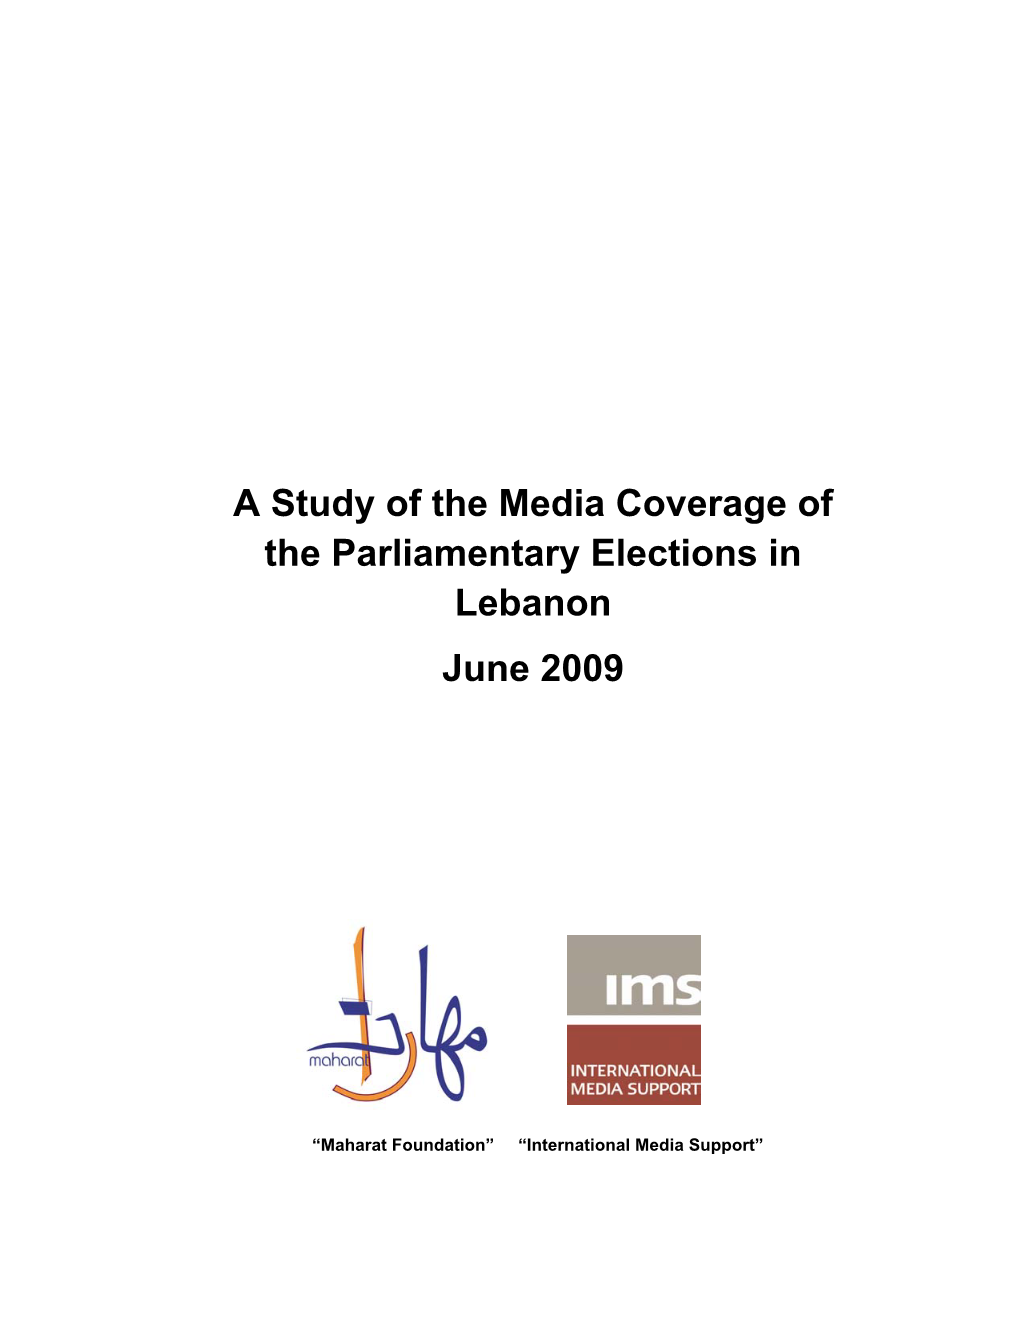 A Study of the Media Coverage of the Parliamentary Elections in Lebanon June 2009